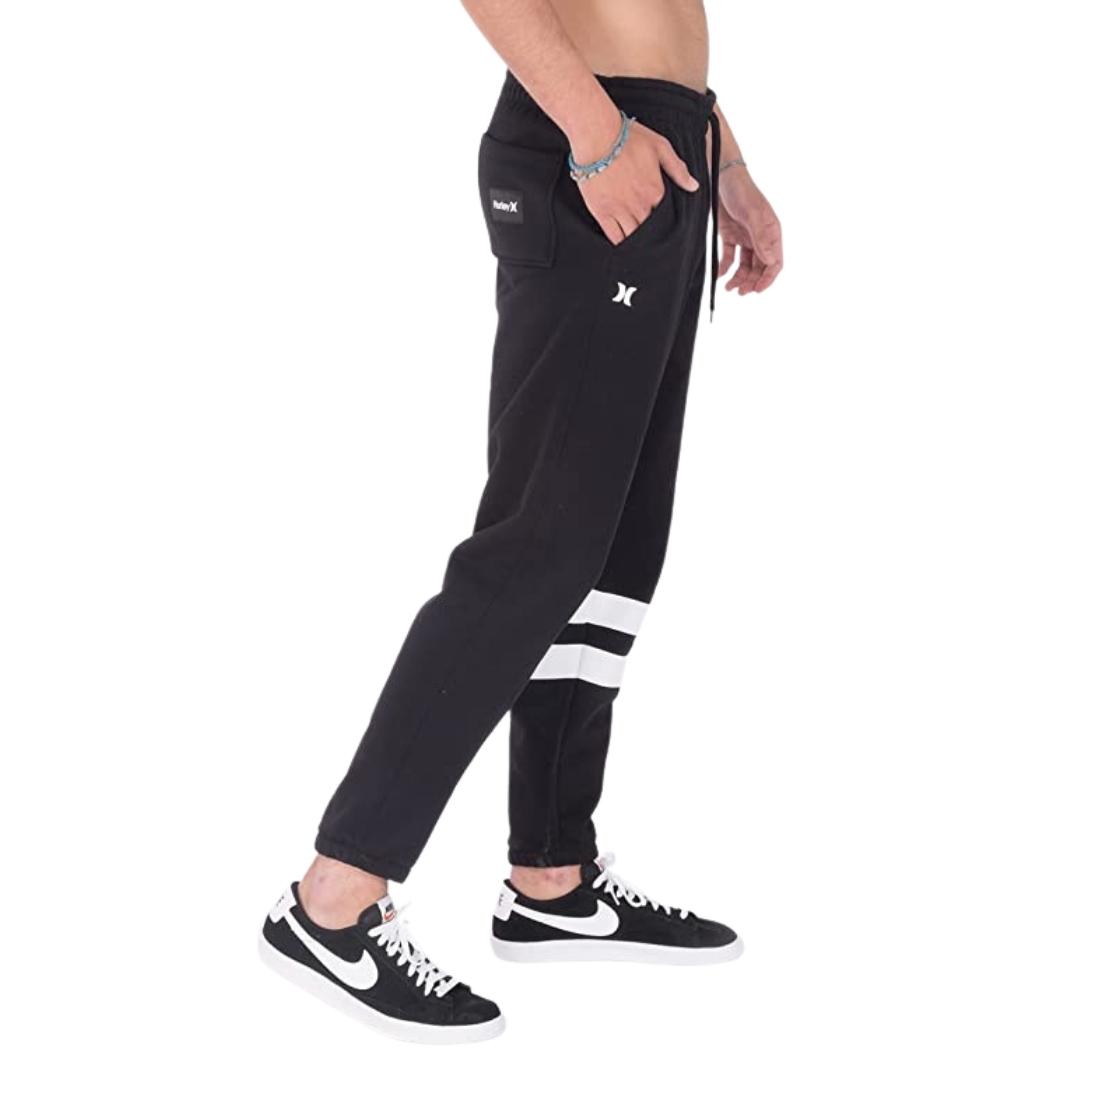 Hurley Oceancare Block Party Fleece Pant Jogger - Black - Mens Joggers by Hurley